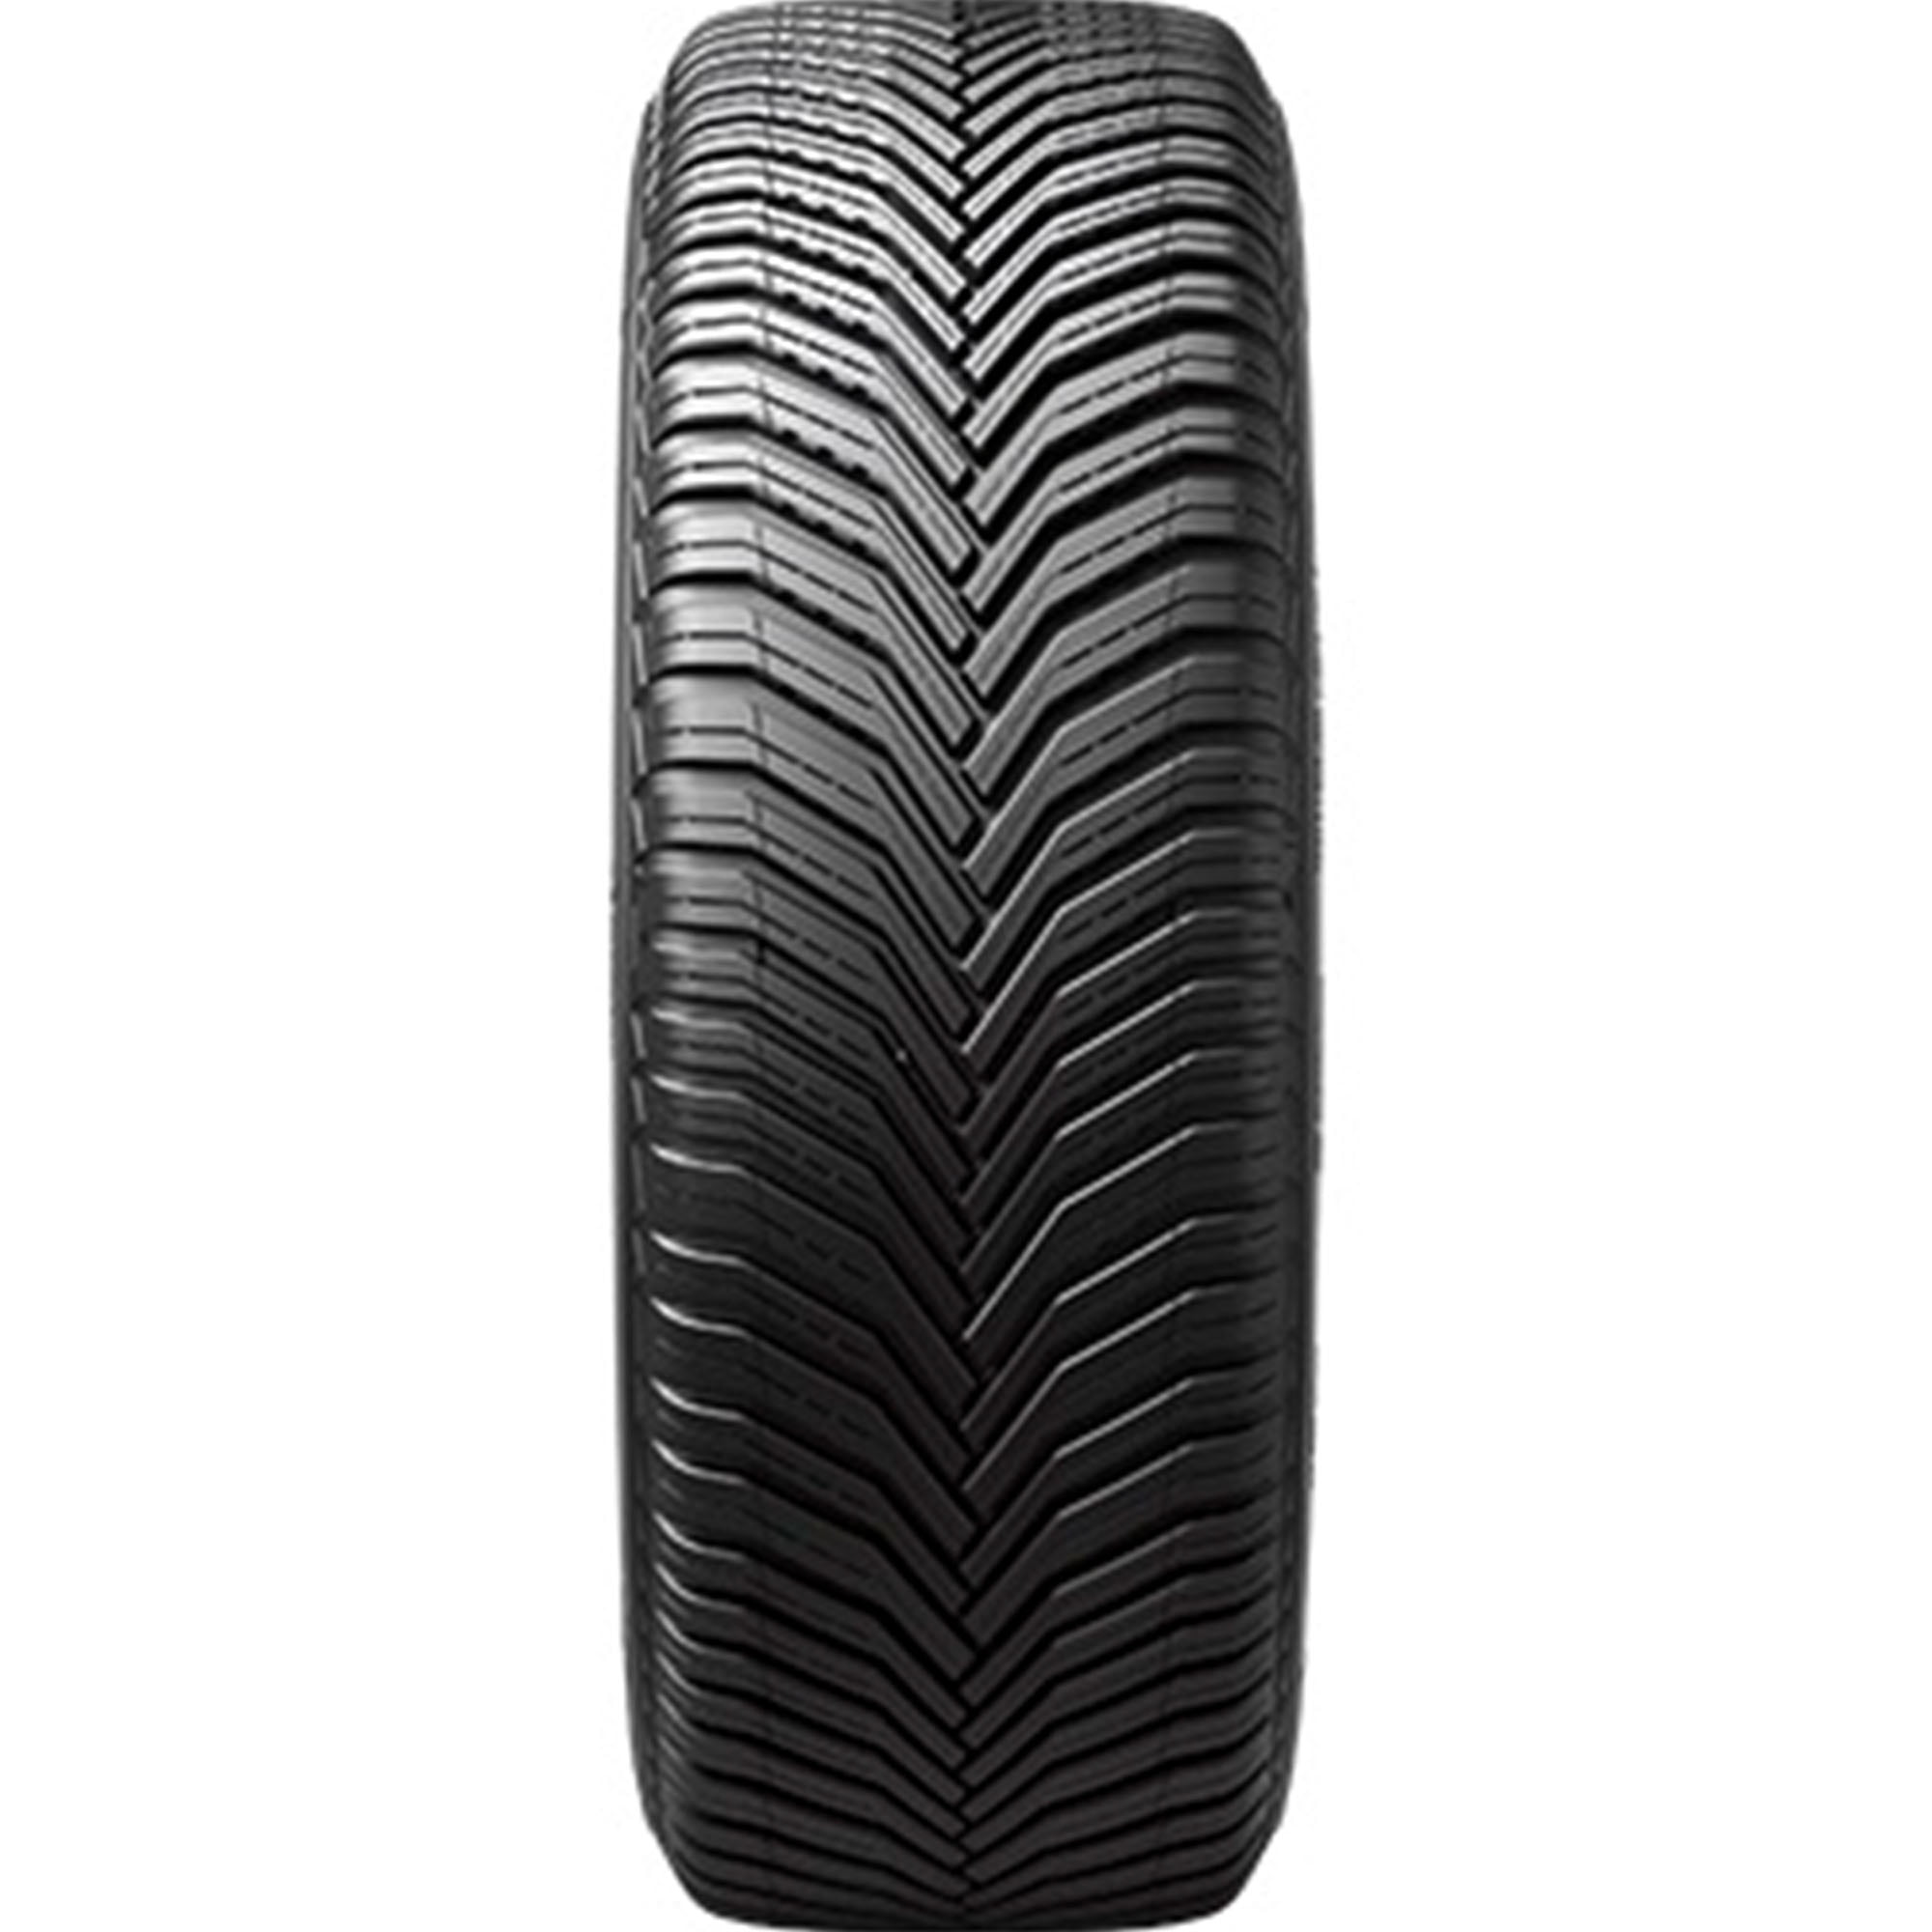 Michelin Cross Climate2 A/W All XL SUV/Crossover 235/55R19 Weather Tire 105V